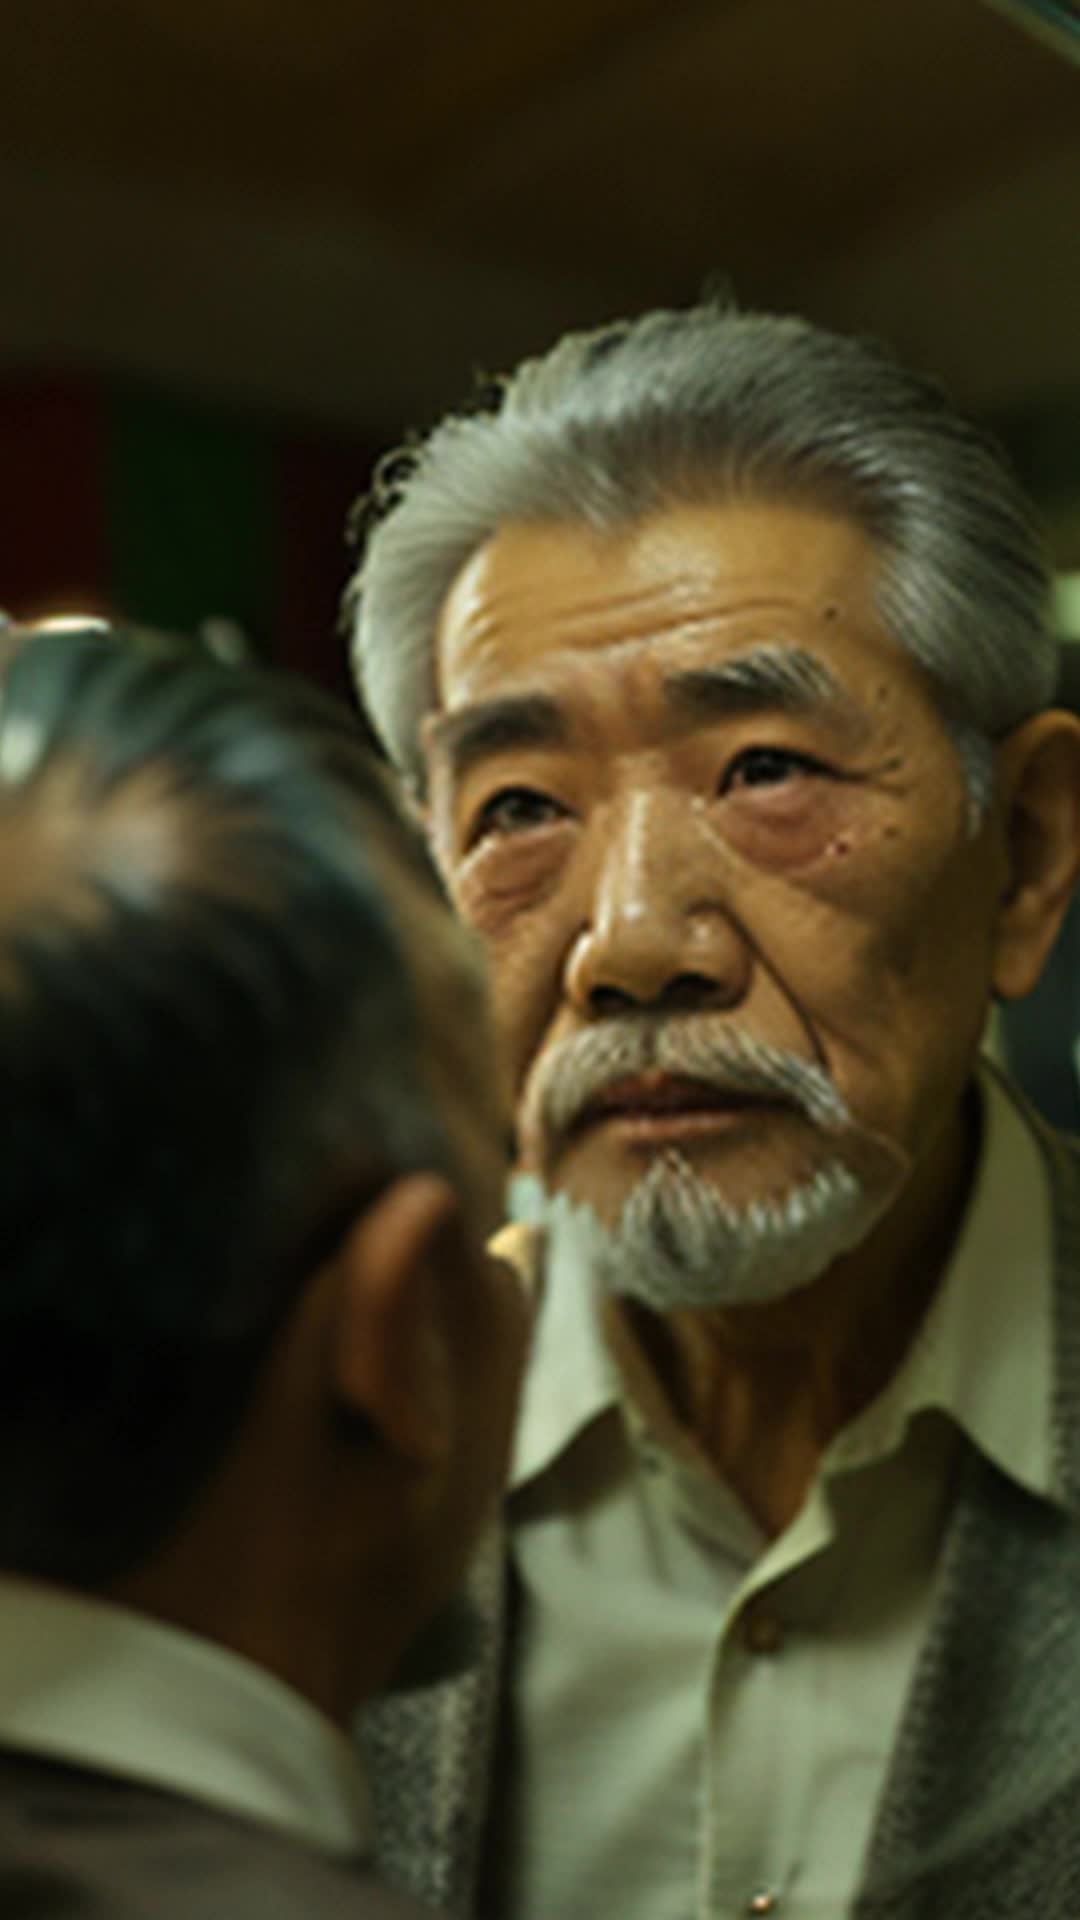 Elderly Asian man brushing off stray beard hairs, studying reflection in mirror, eyes twinkling with swagger, barber shop setting, festive mood, preparations for granddaughter's wedding